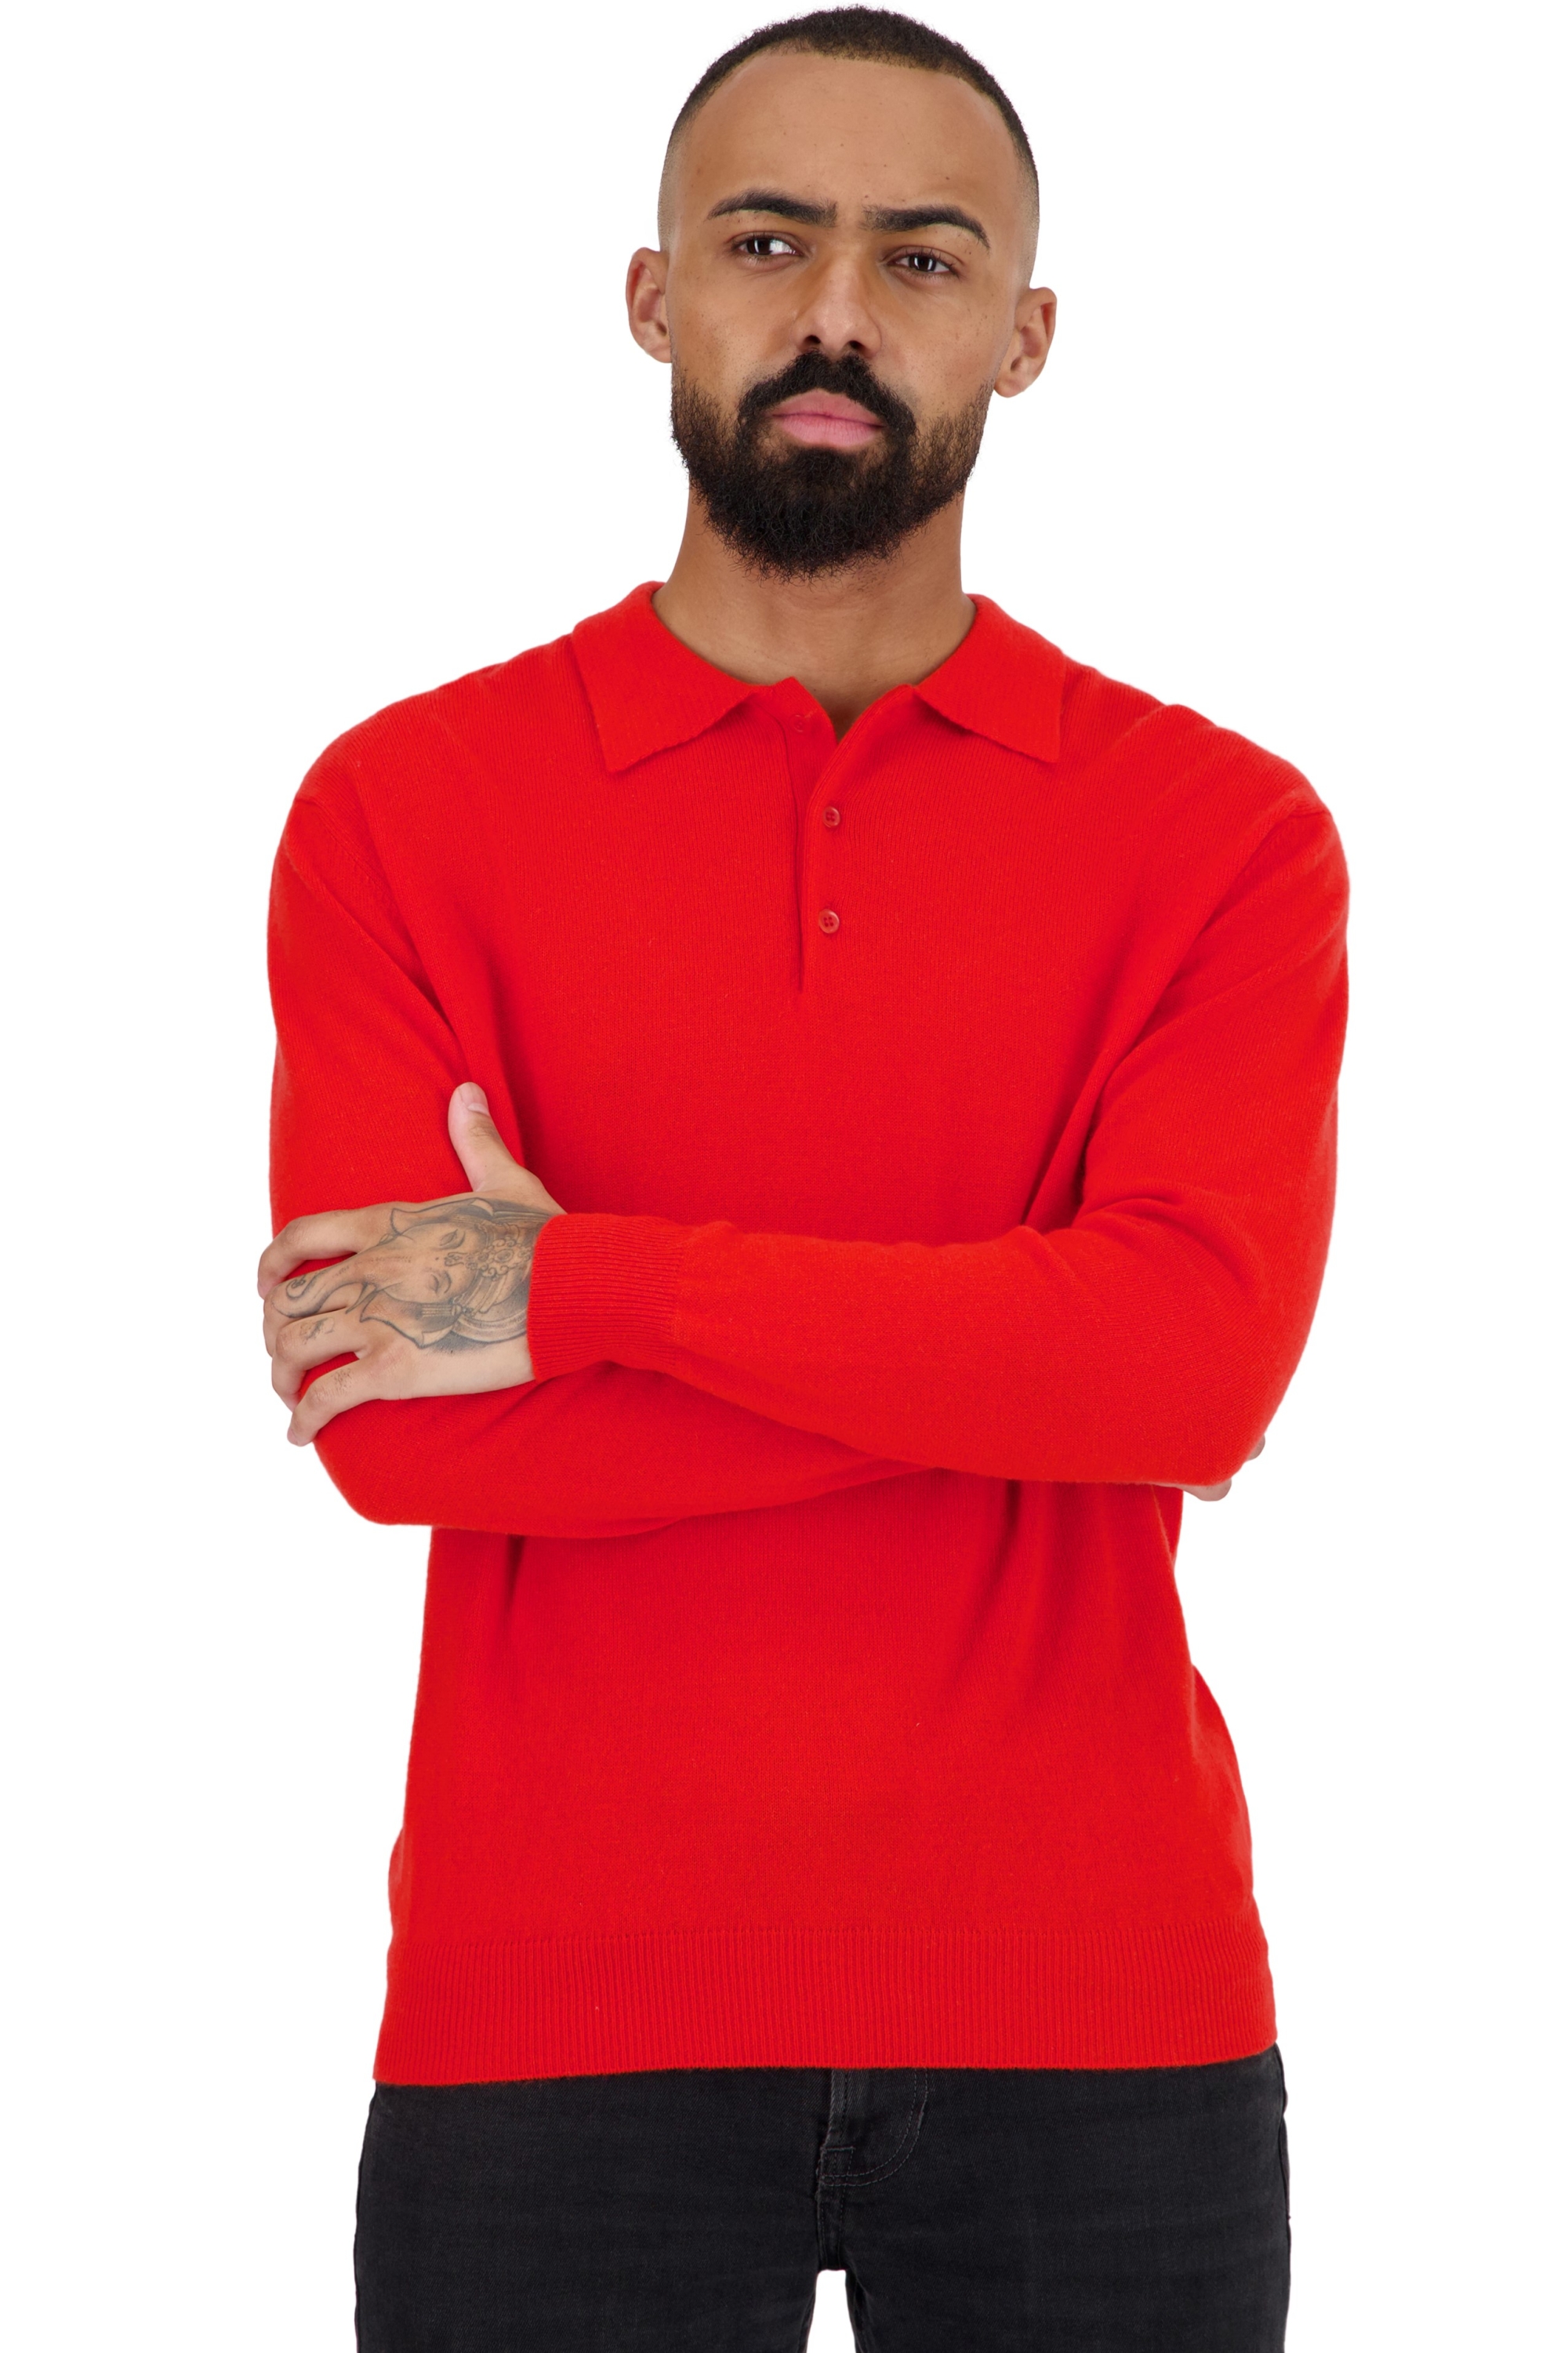 Cashmere men basic sweaters at low prices tarn first tomato m